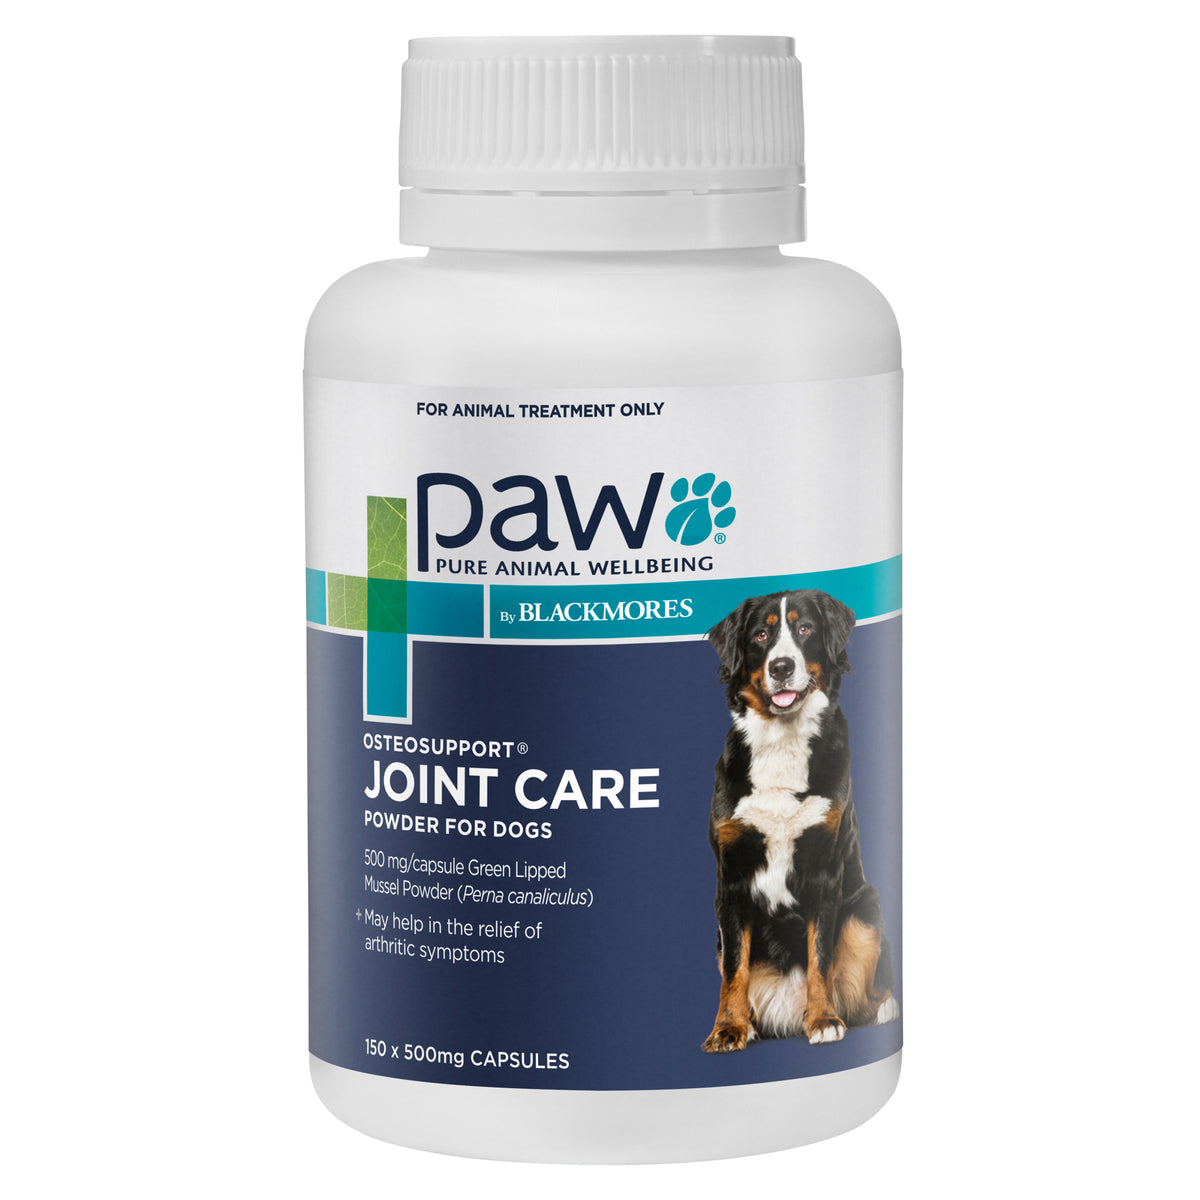 PAW OsteoSupport Joint Care Powder for Dogs